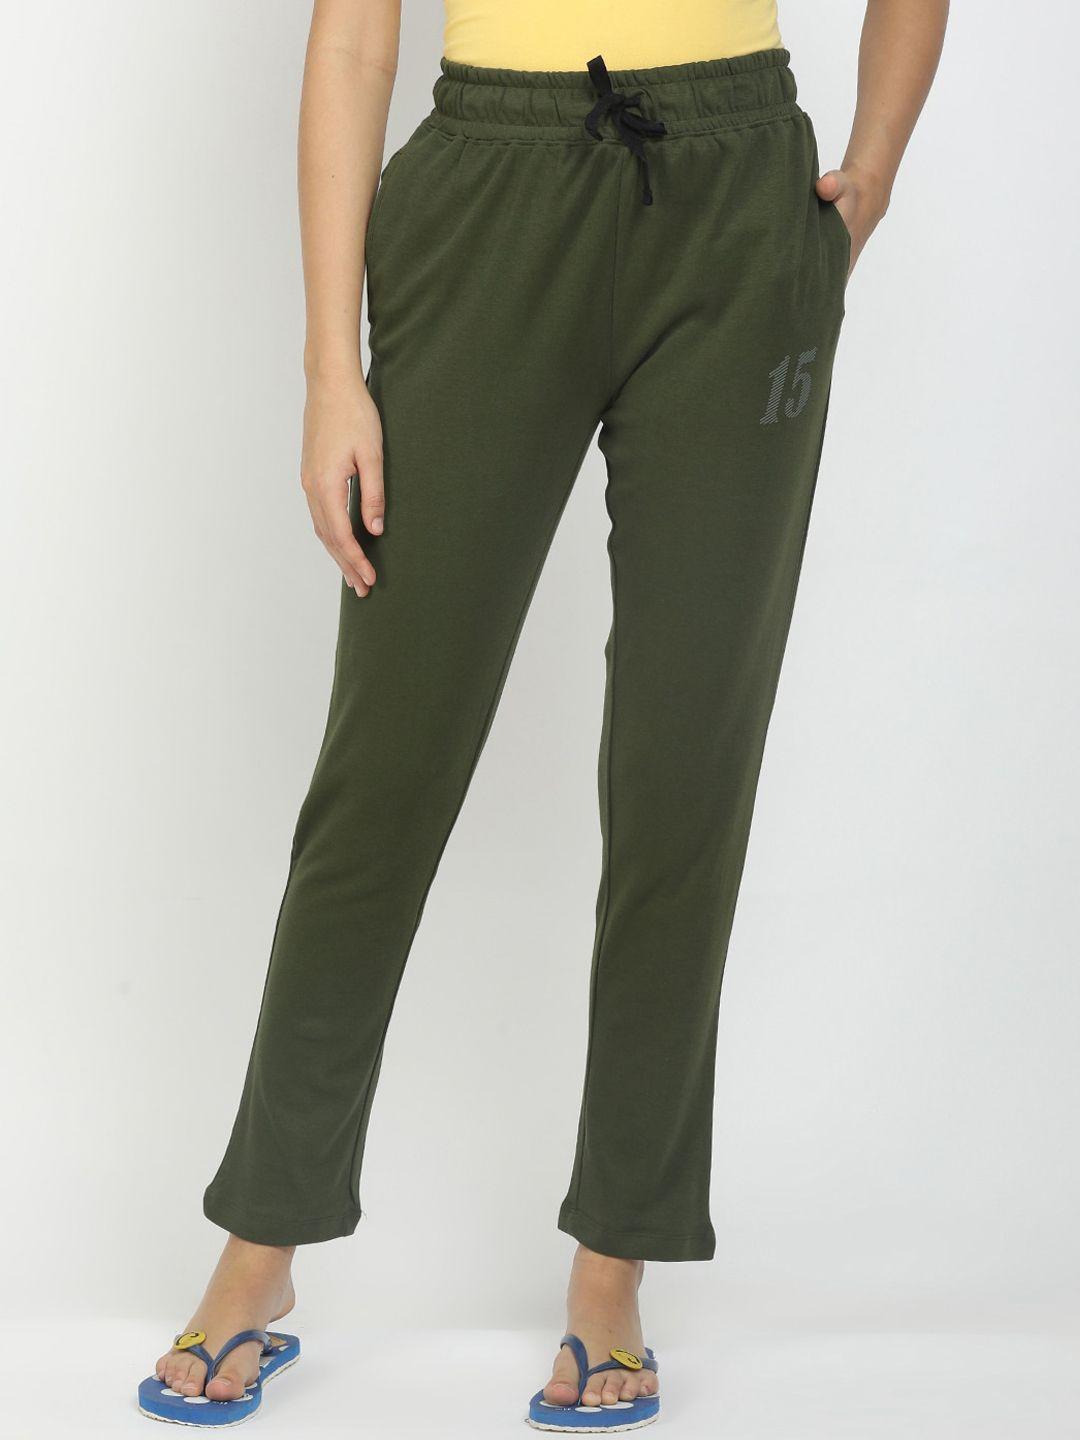 sugr women olive-green solid cotton track pants